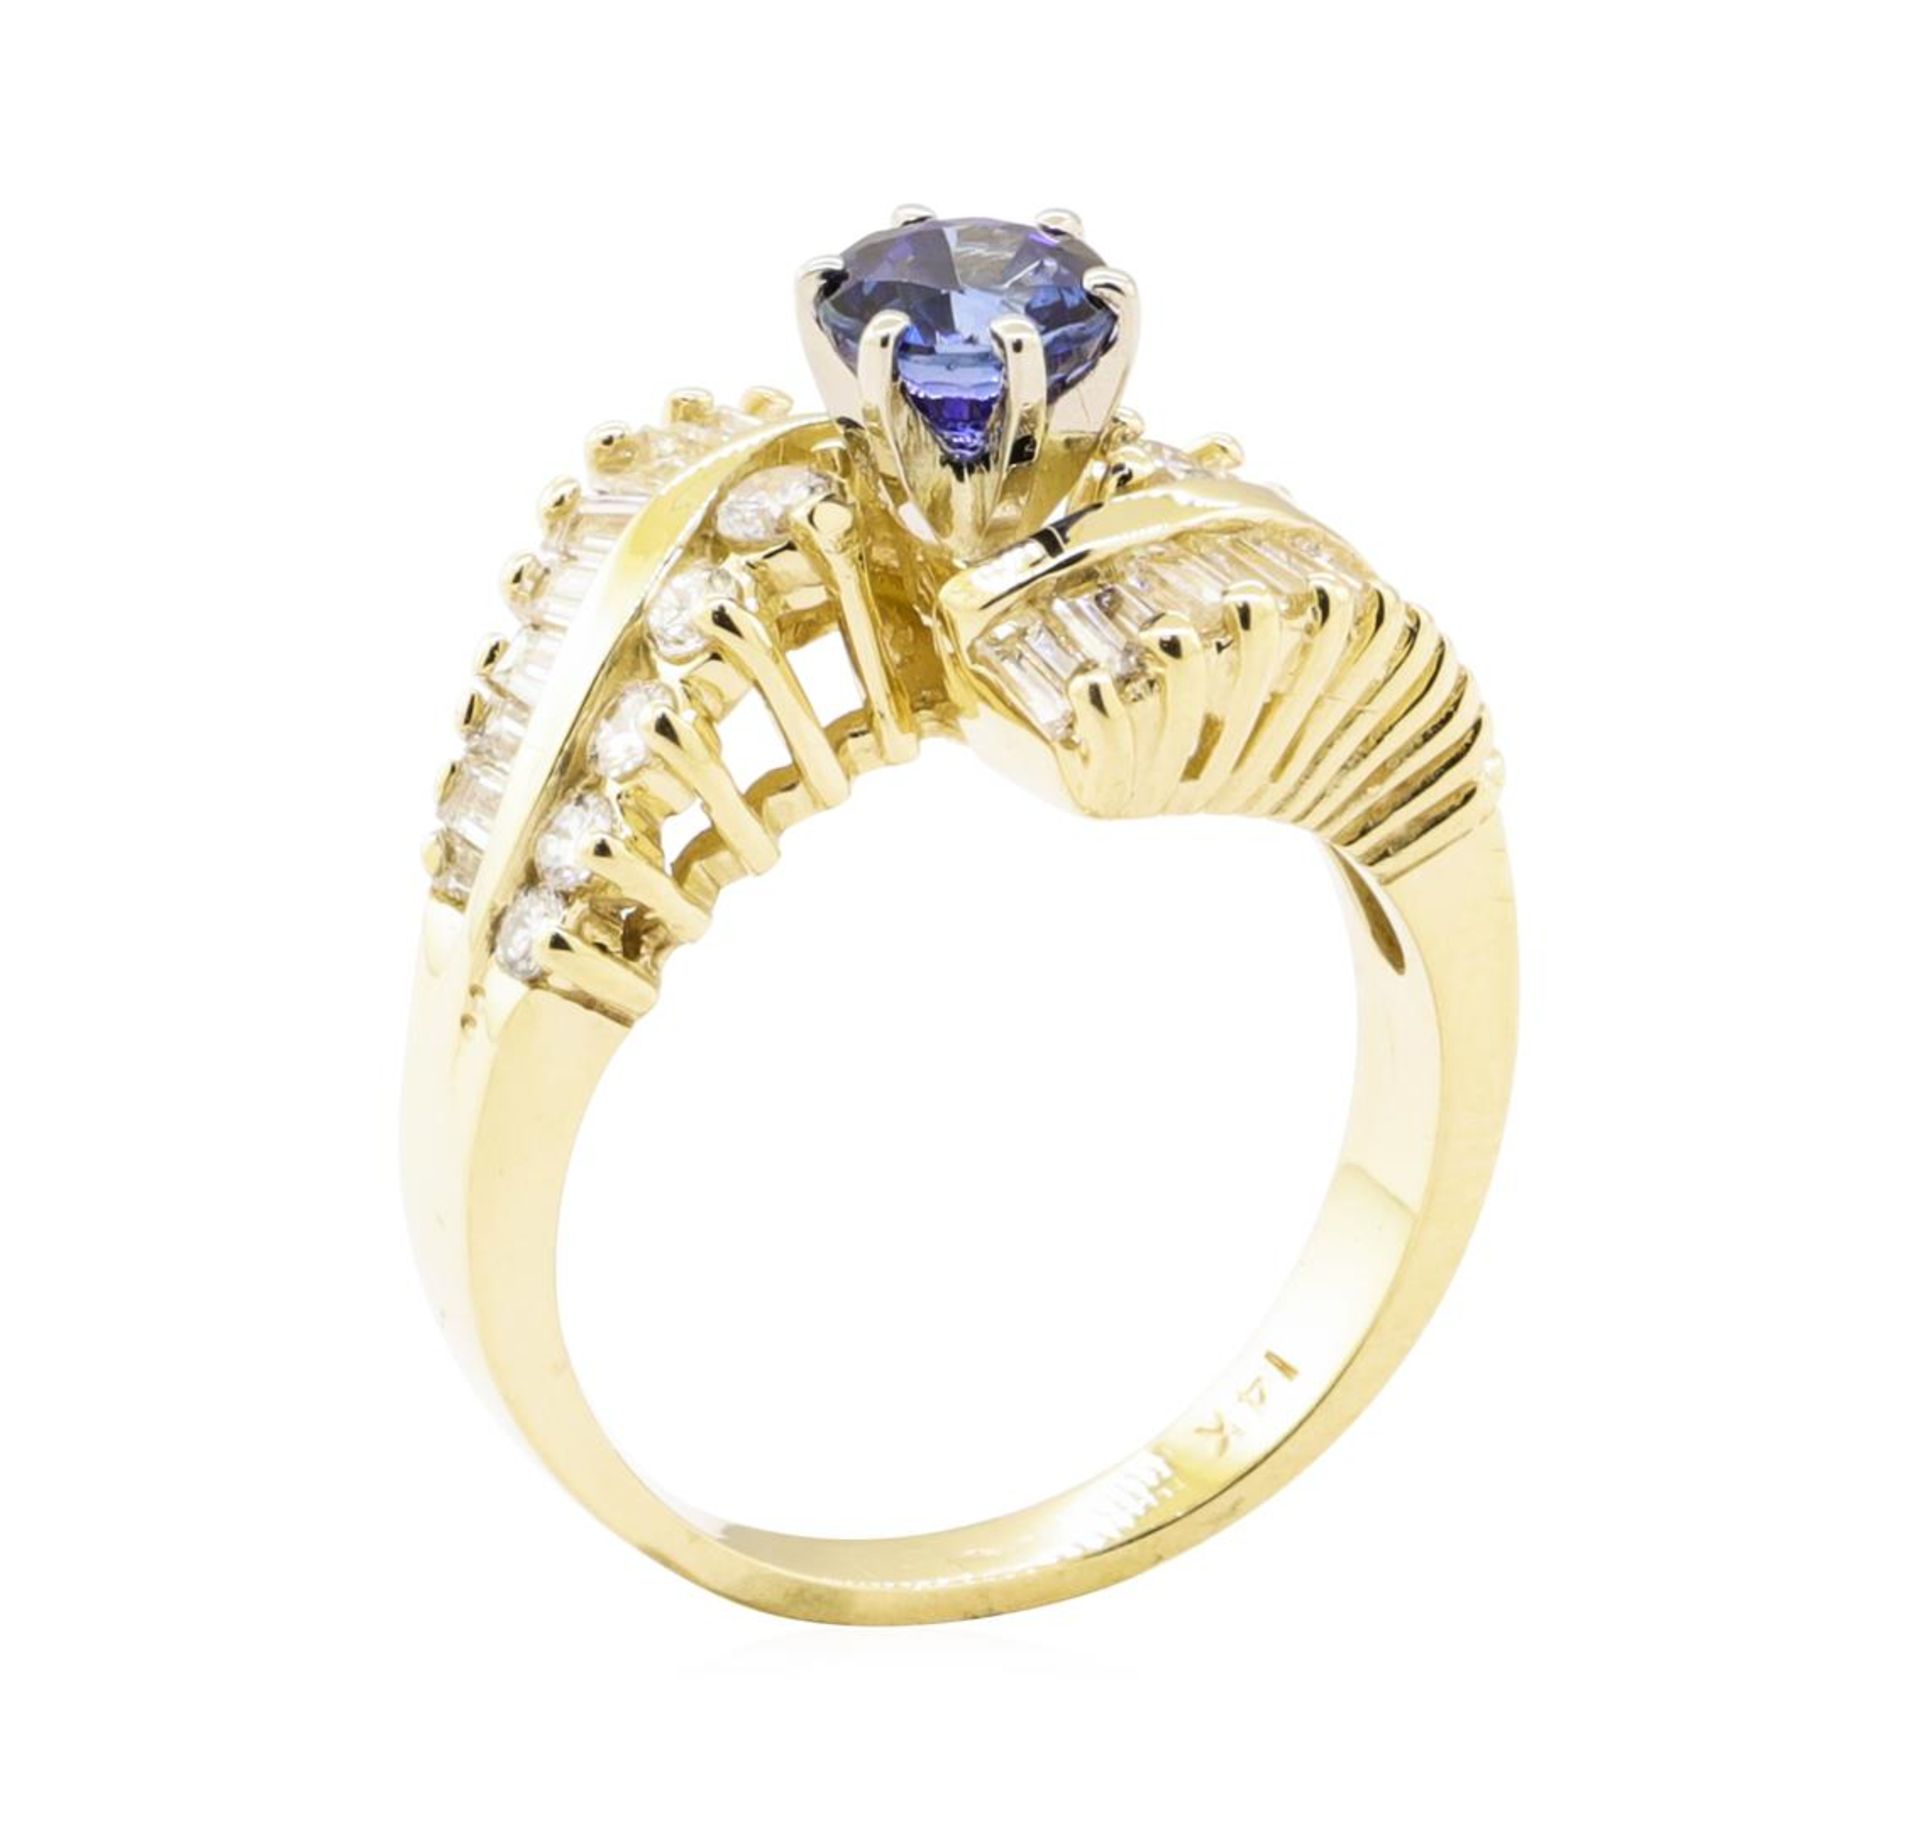 2.03 ctw Blue Sapphire And Diamond Ring - 14KT Yellow Gold - Image 4 of 5